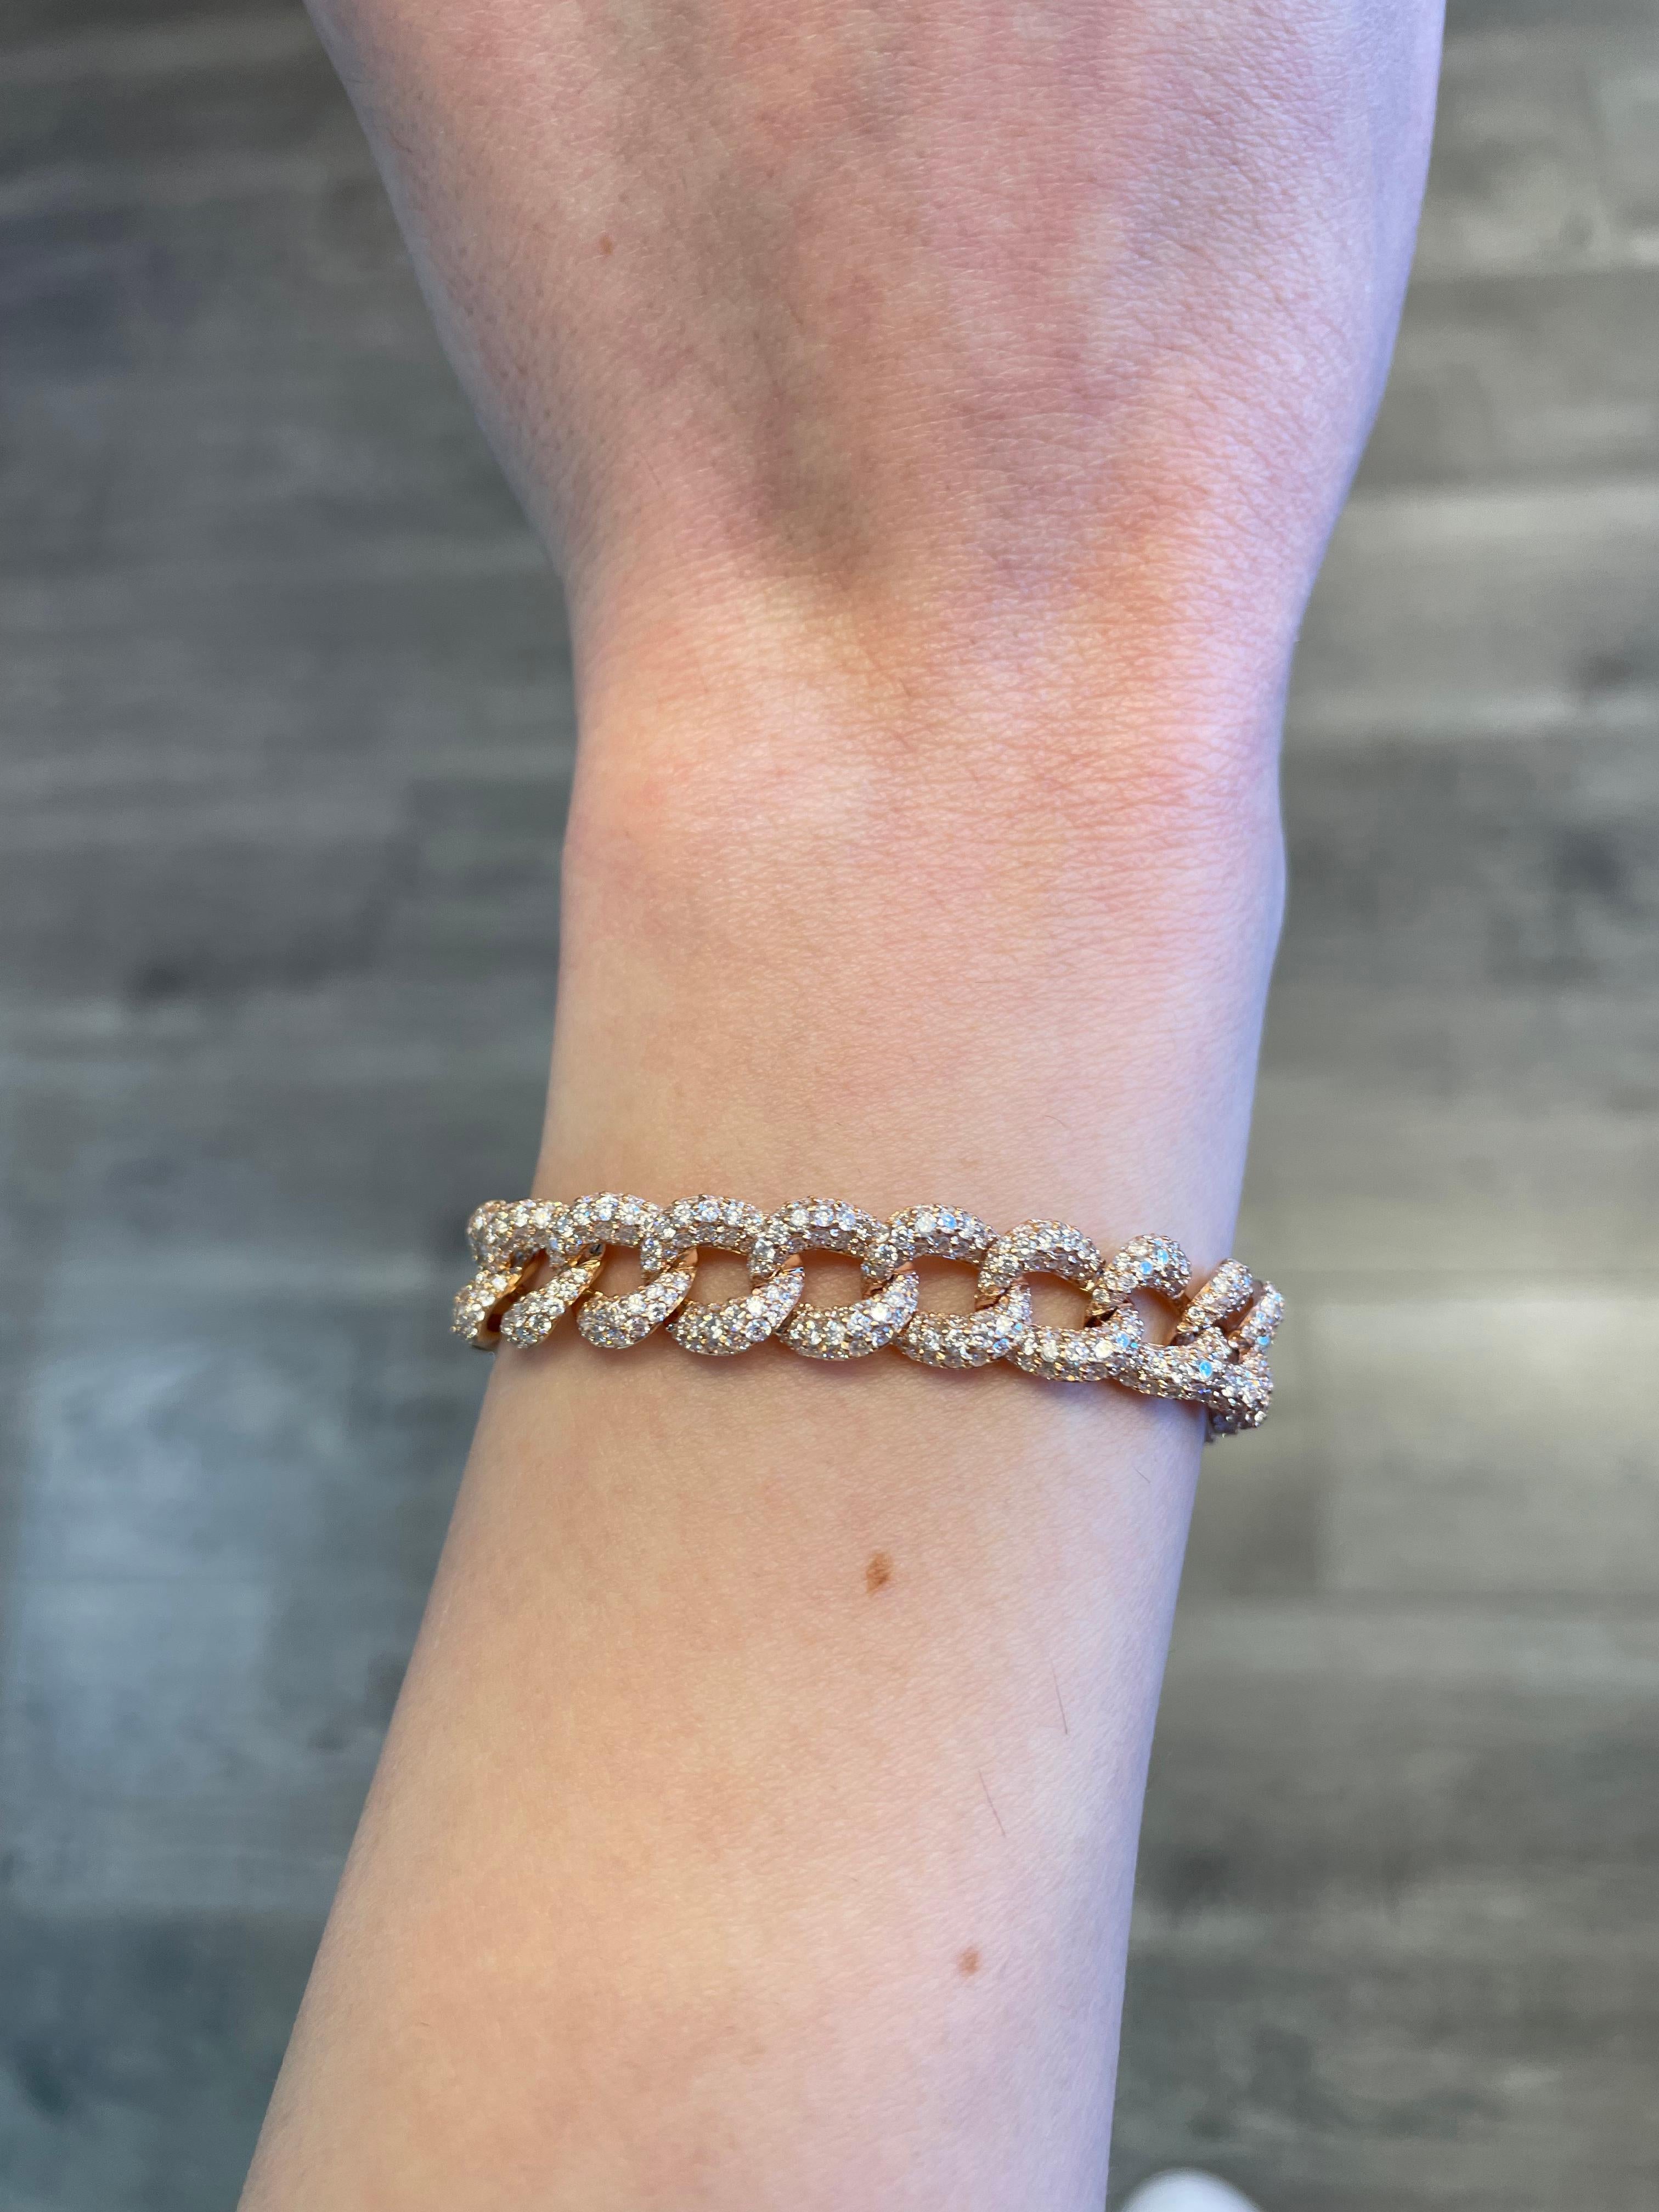 Modern diamond cuban link bracelet. High jewelry by Alexander Beverly Hills.
1290 round brilliant diamonds, 10.24 carats total. Approximately G/H color and VS2/SI1 clarity. 18k rose gold, 46.30 grams, and 12mm width.
Accommodated with an up-to-date